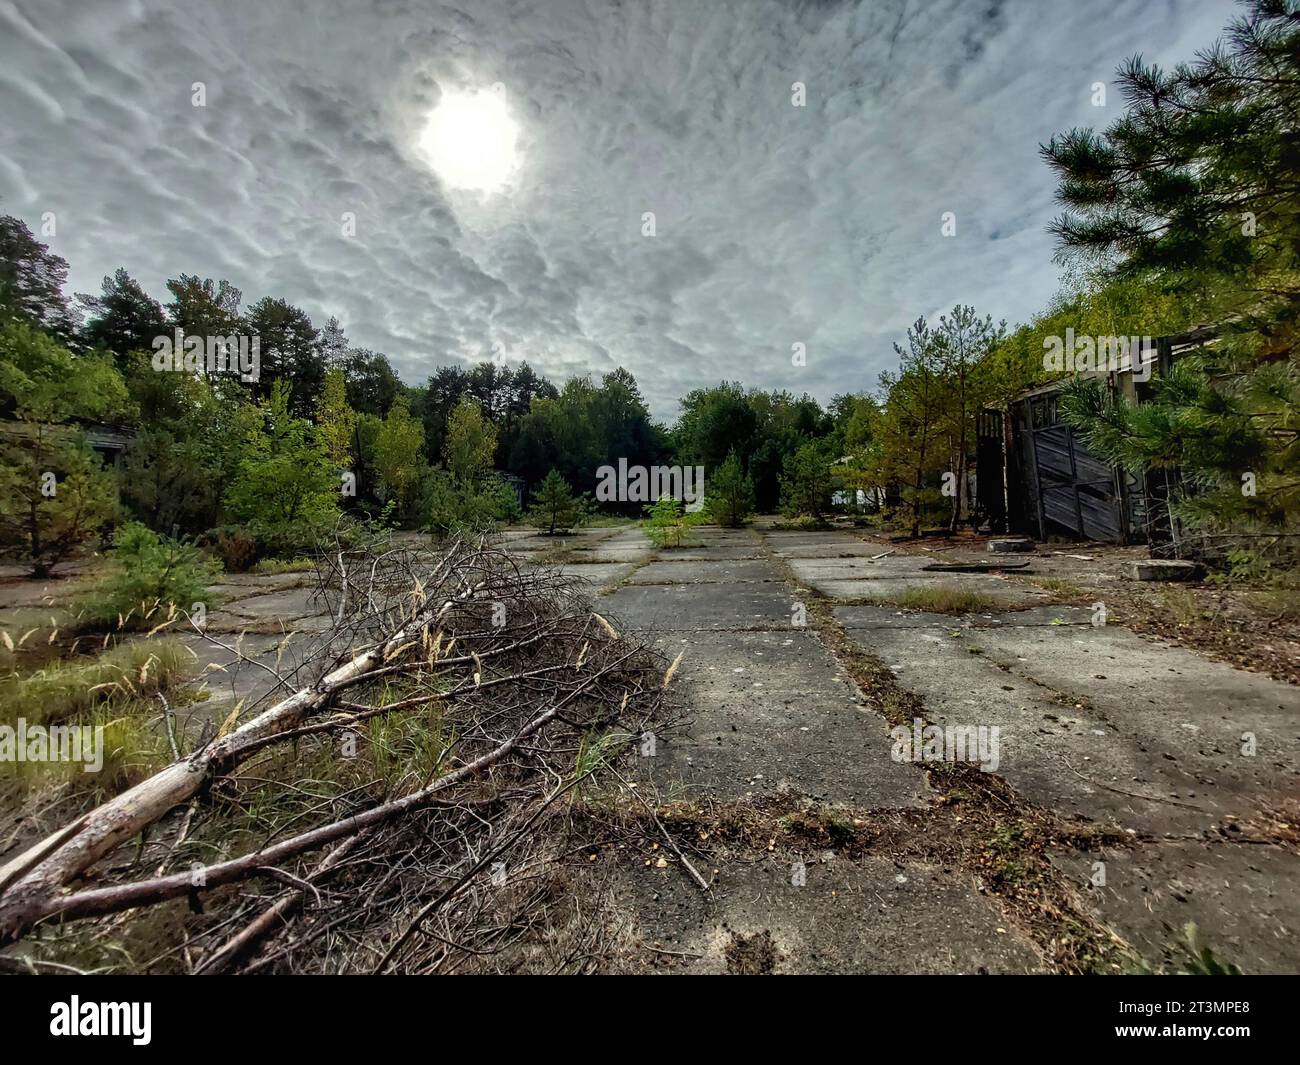 Unused abandoned site in a forest with concrete roads and wooden sheds. Stock Photo